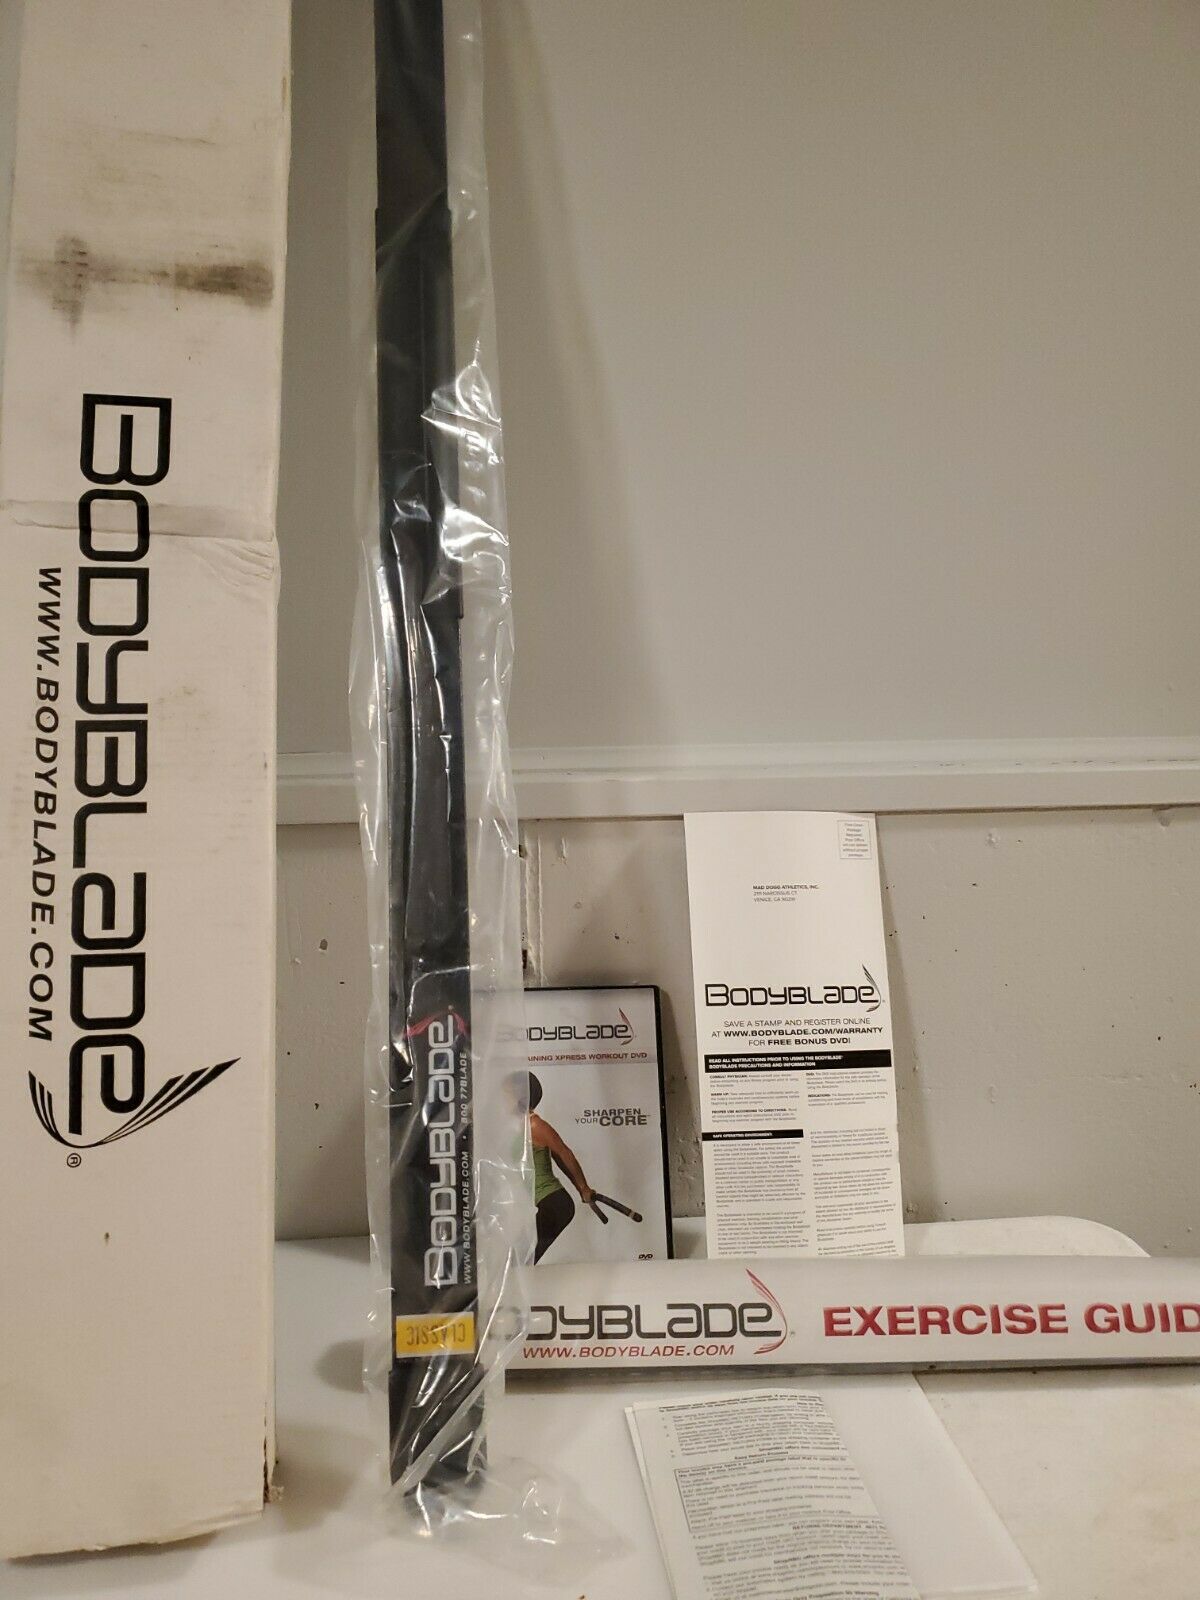 New Nos Bodyblade Classic 800 77 Blade, Work Out Chart Snd Sealed Dvd, All New